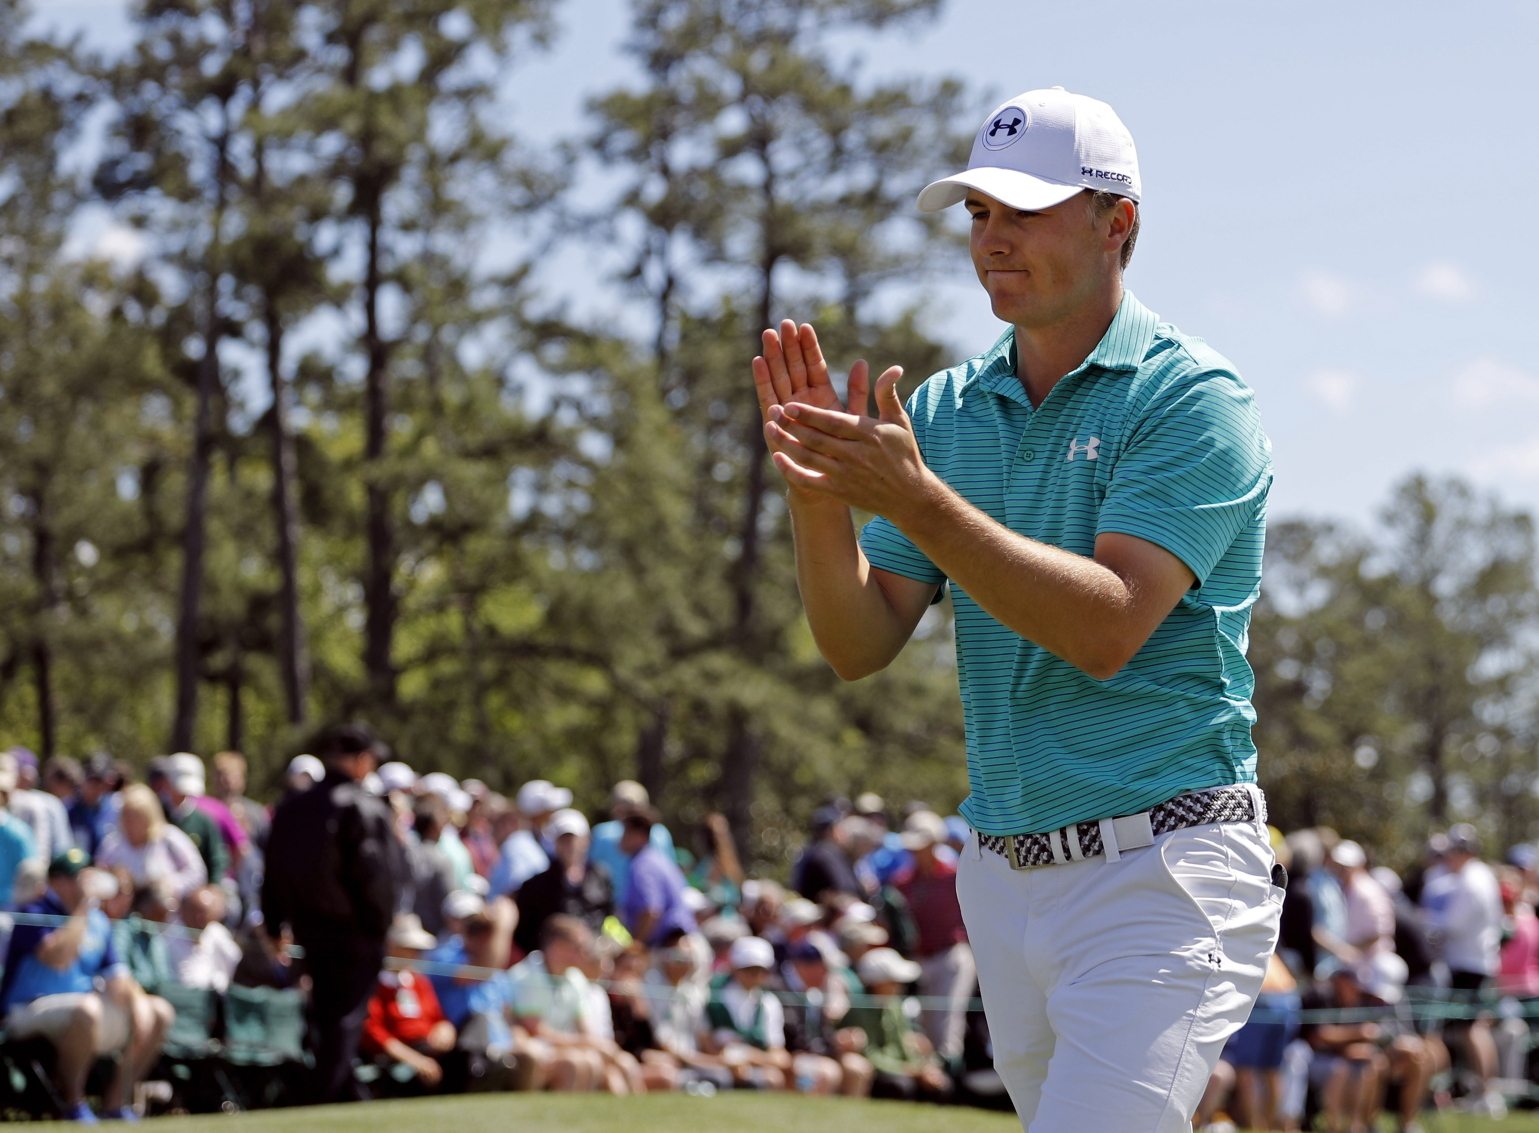 Jordan Spieth applauds on the 18th green following his first round of the Masters golf tournament Thursday, April 7, 2016, in Augusta, Ga.